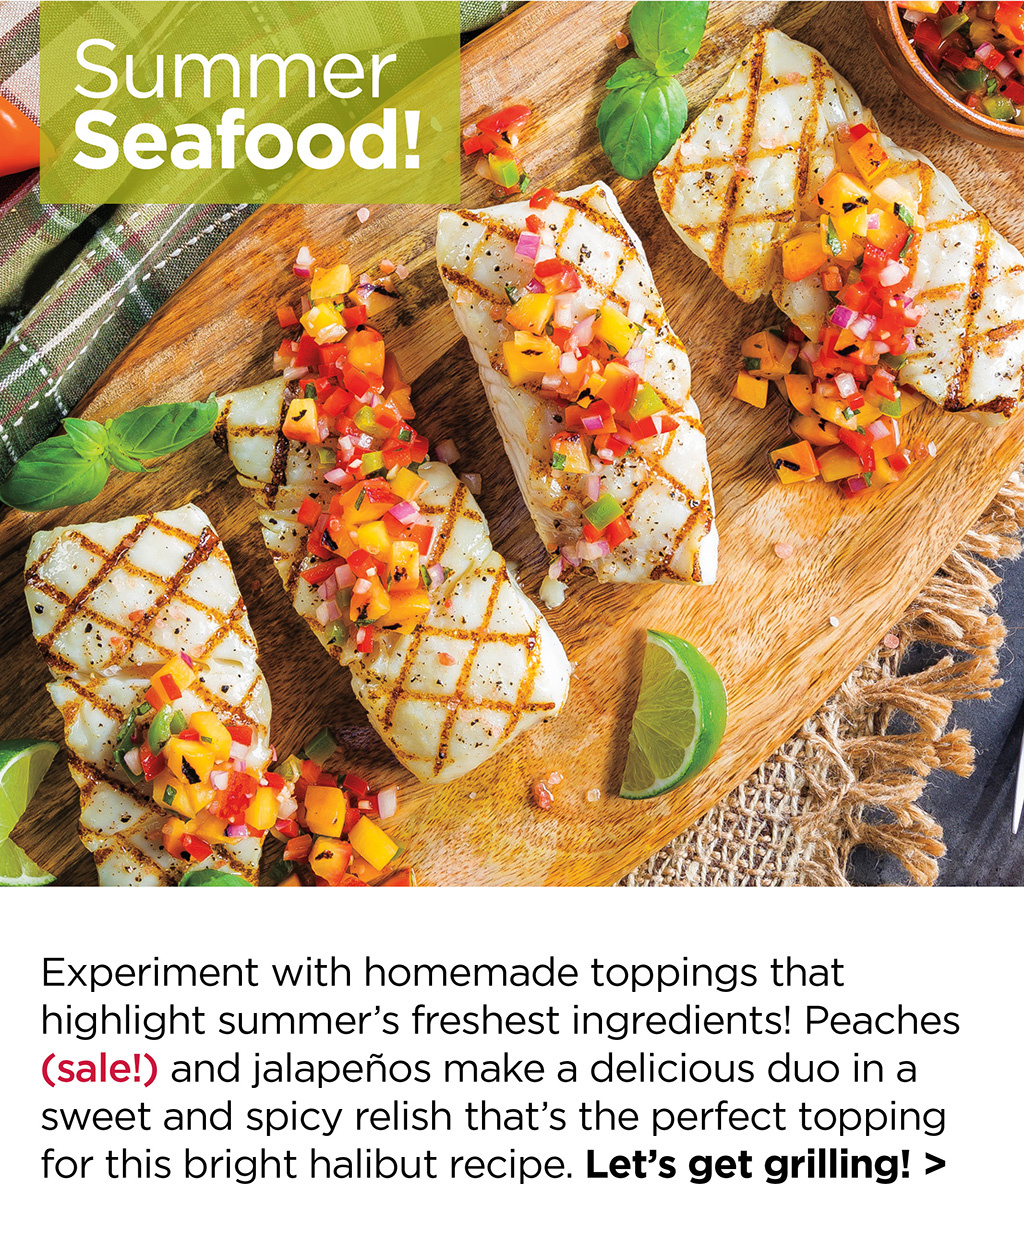 Summer Seafood! Experiment with homemade toppings that highlight summer's freshest ingredients! Peaches (sale!) and jalape?os make a delicious duo in a sweet and spicy relish that's the perfect topping for this bright halibut recipe. Let's get grilling! >